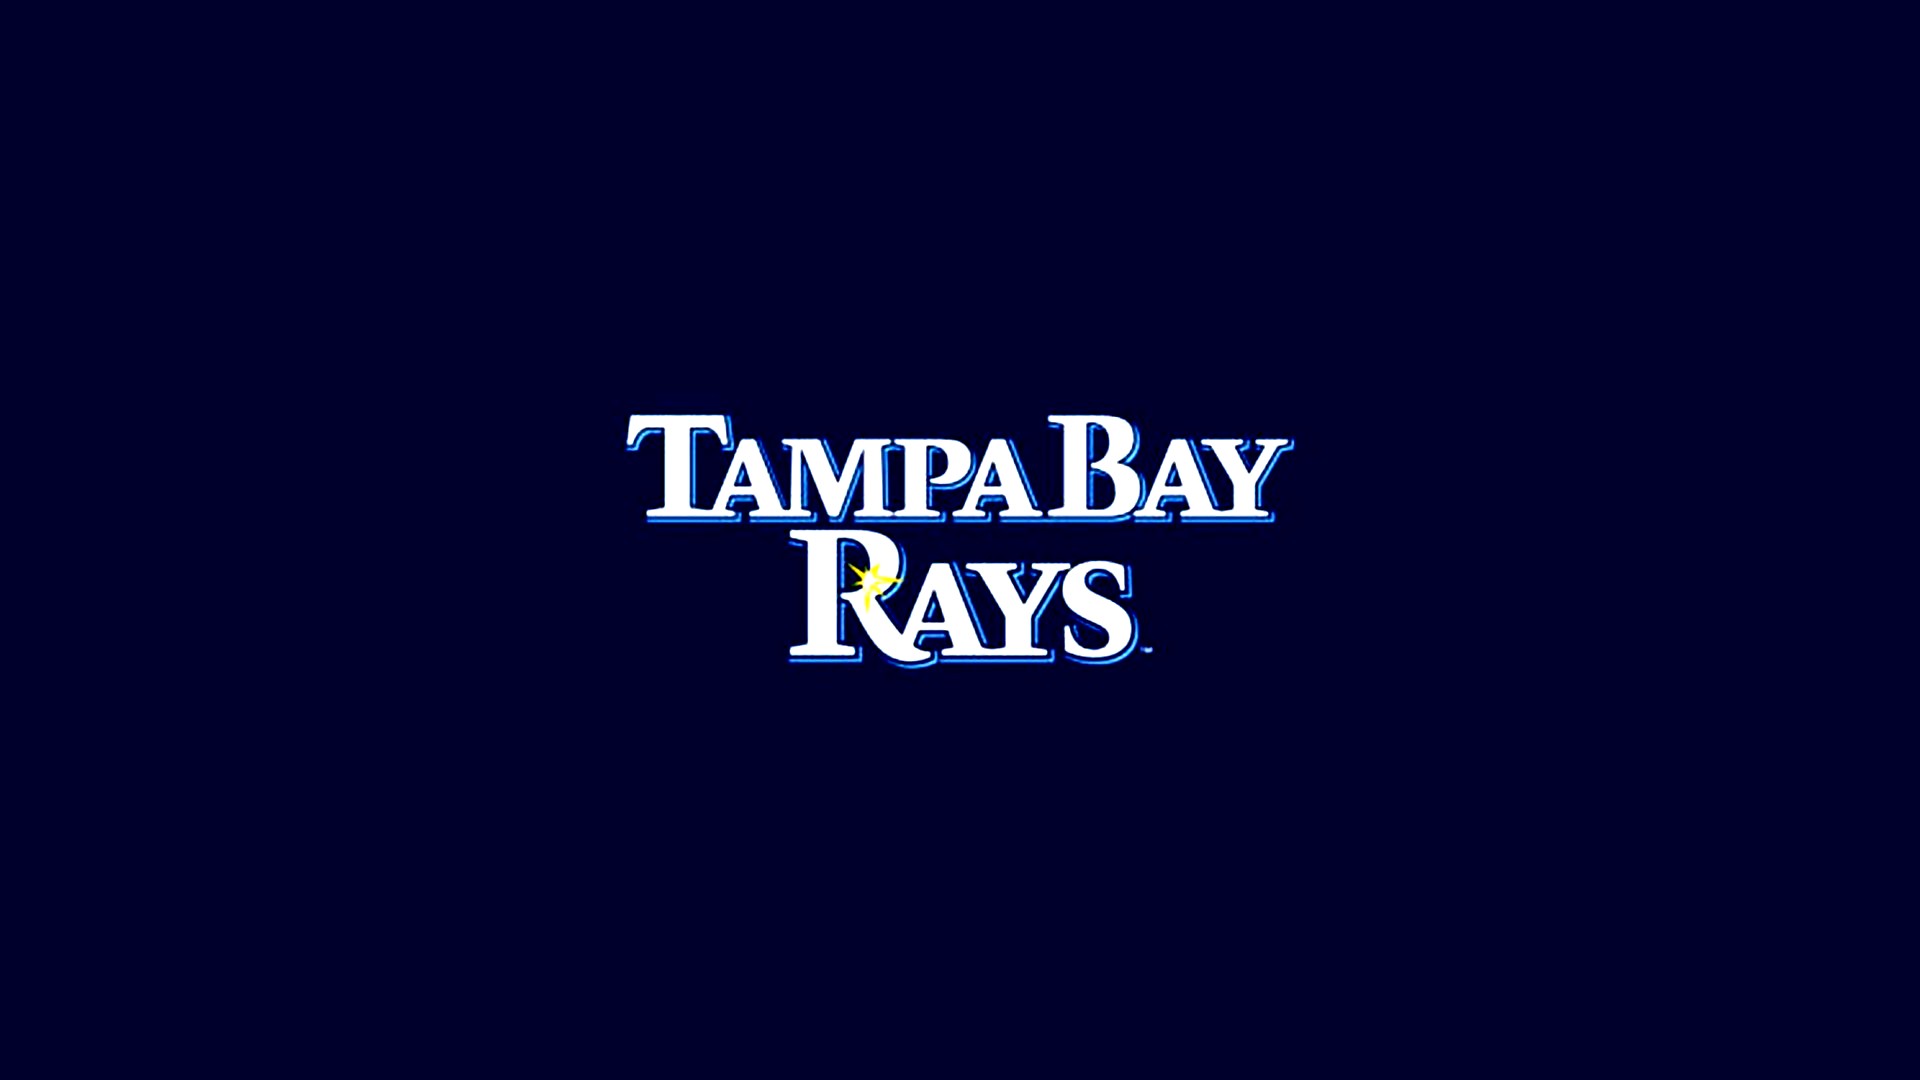 Tampa Bay Rays Logo Laptop Wallpaper with high-resolution 1920x1080 pixel. You can use this wallpaper for Mac Desktop Wallpaper, Laptop Screensavers, Android Wallpapers, Tablet or iPhone Home Screen and another mobile phone device